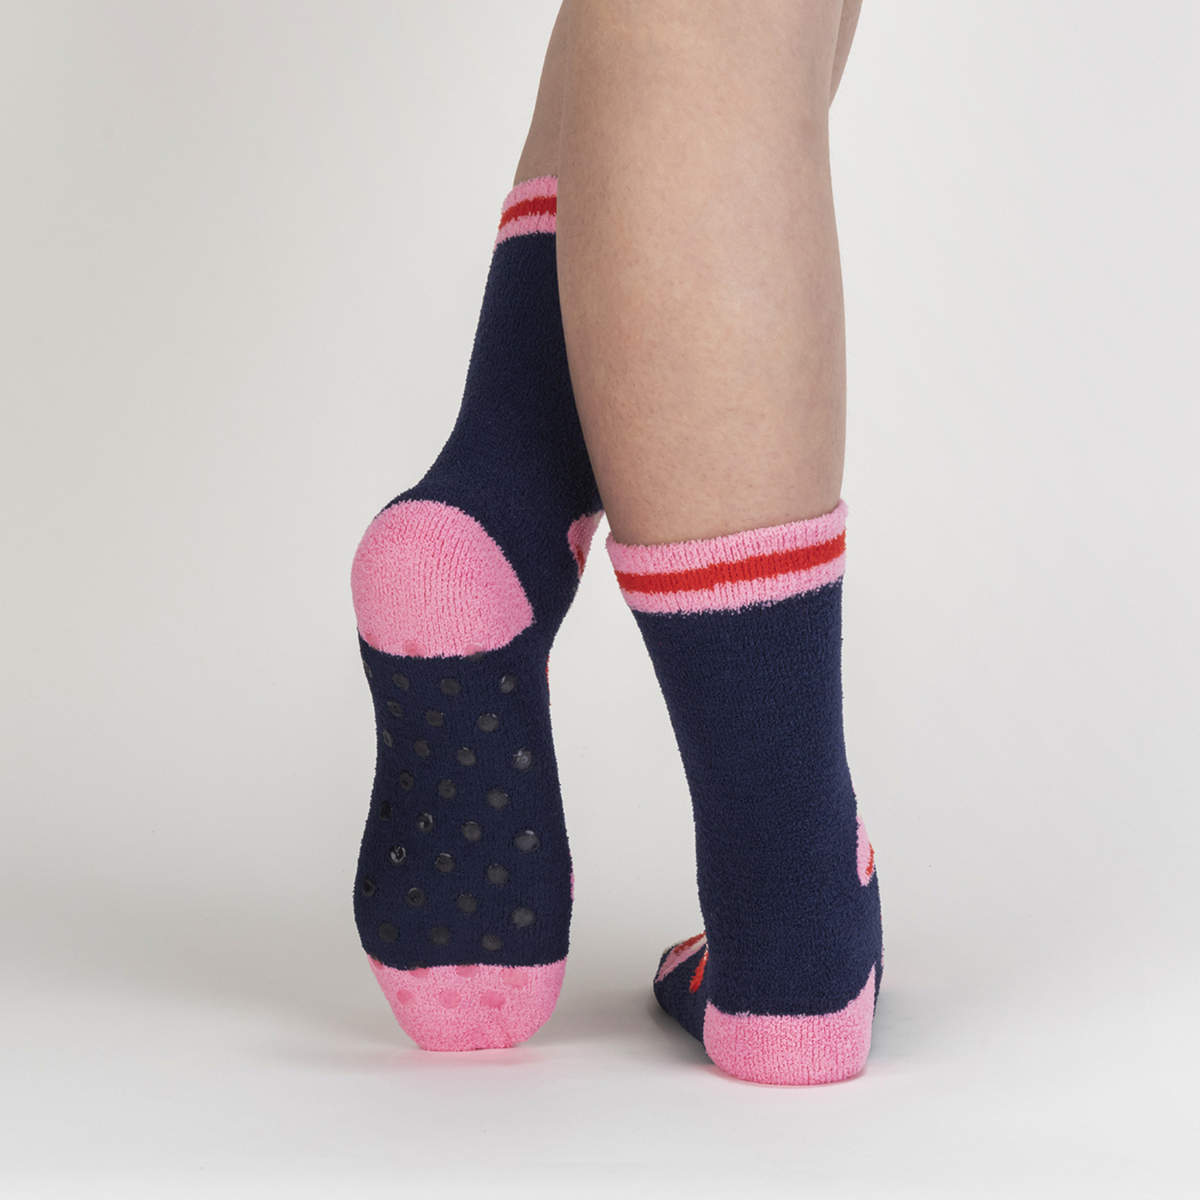 Sock It To Me Magic Mushrooms women&#39;s slipper sock featuring smiling red cap mushrooms on blue slipper sock with grips on bottom worn by model from back showing grippers on bottom of slipper